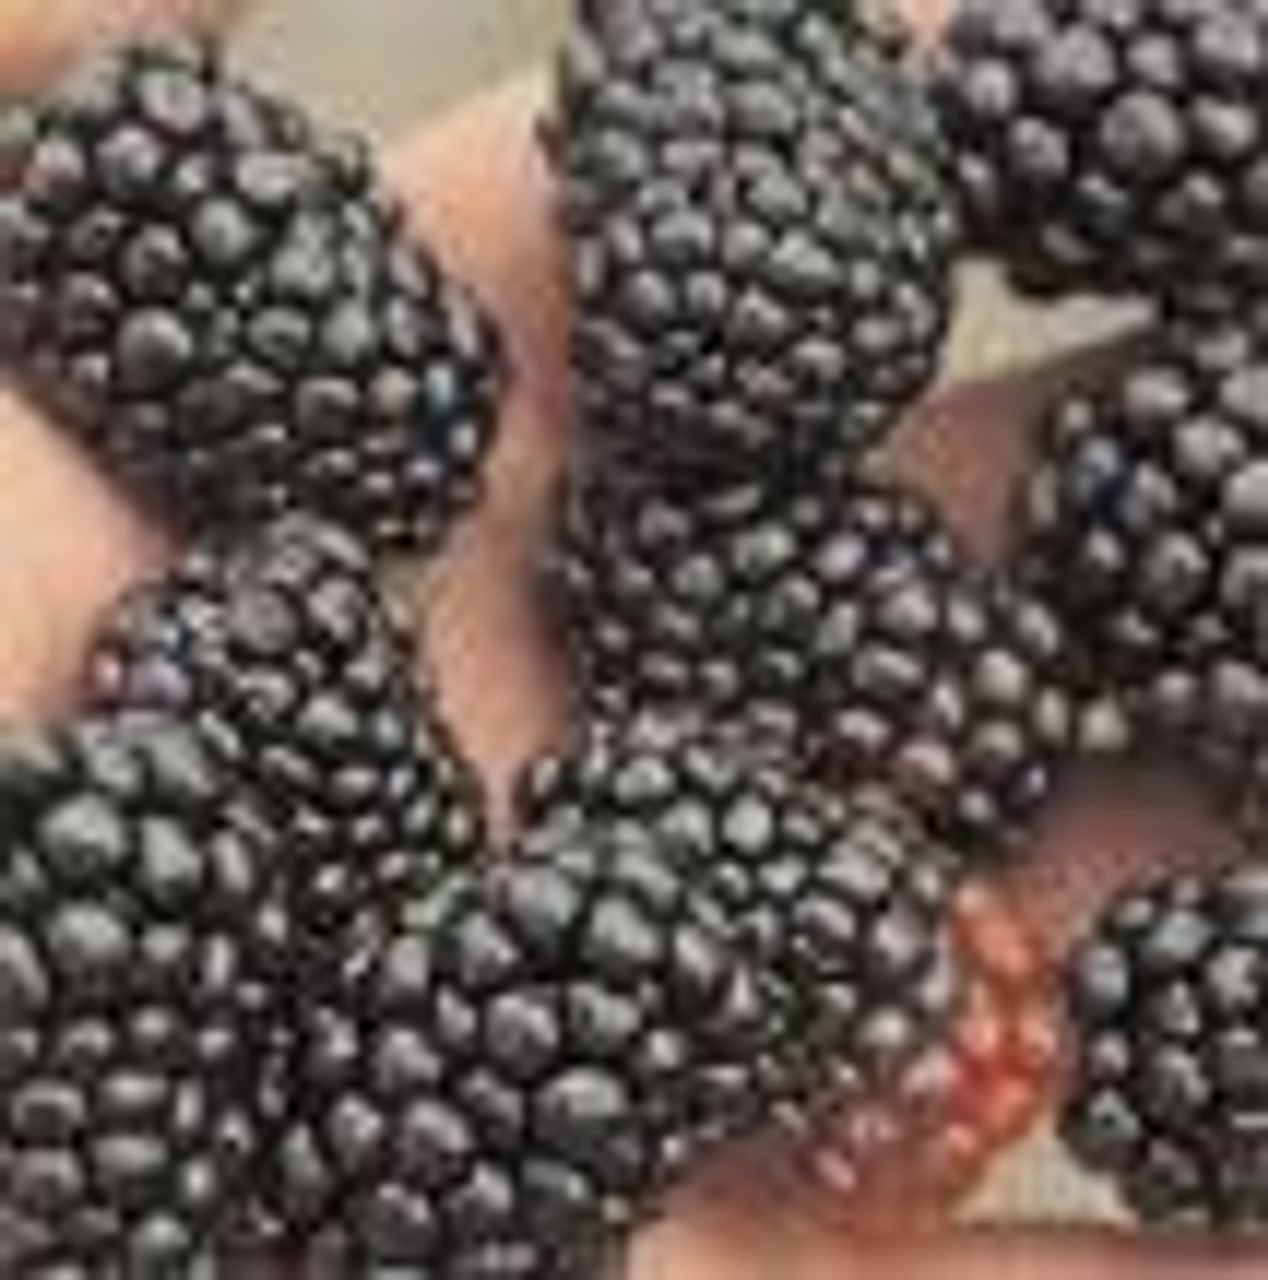 Pack 2 Triple Crown Thornless BlackBerry Bush Tree-Healthy Grown Pesicide 4 to 6 Tall